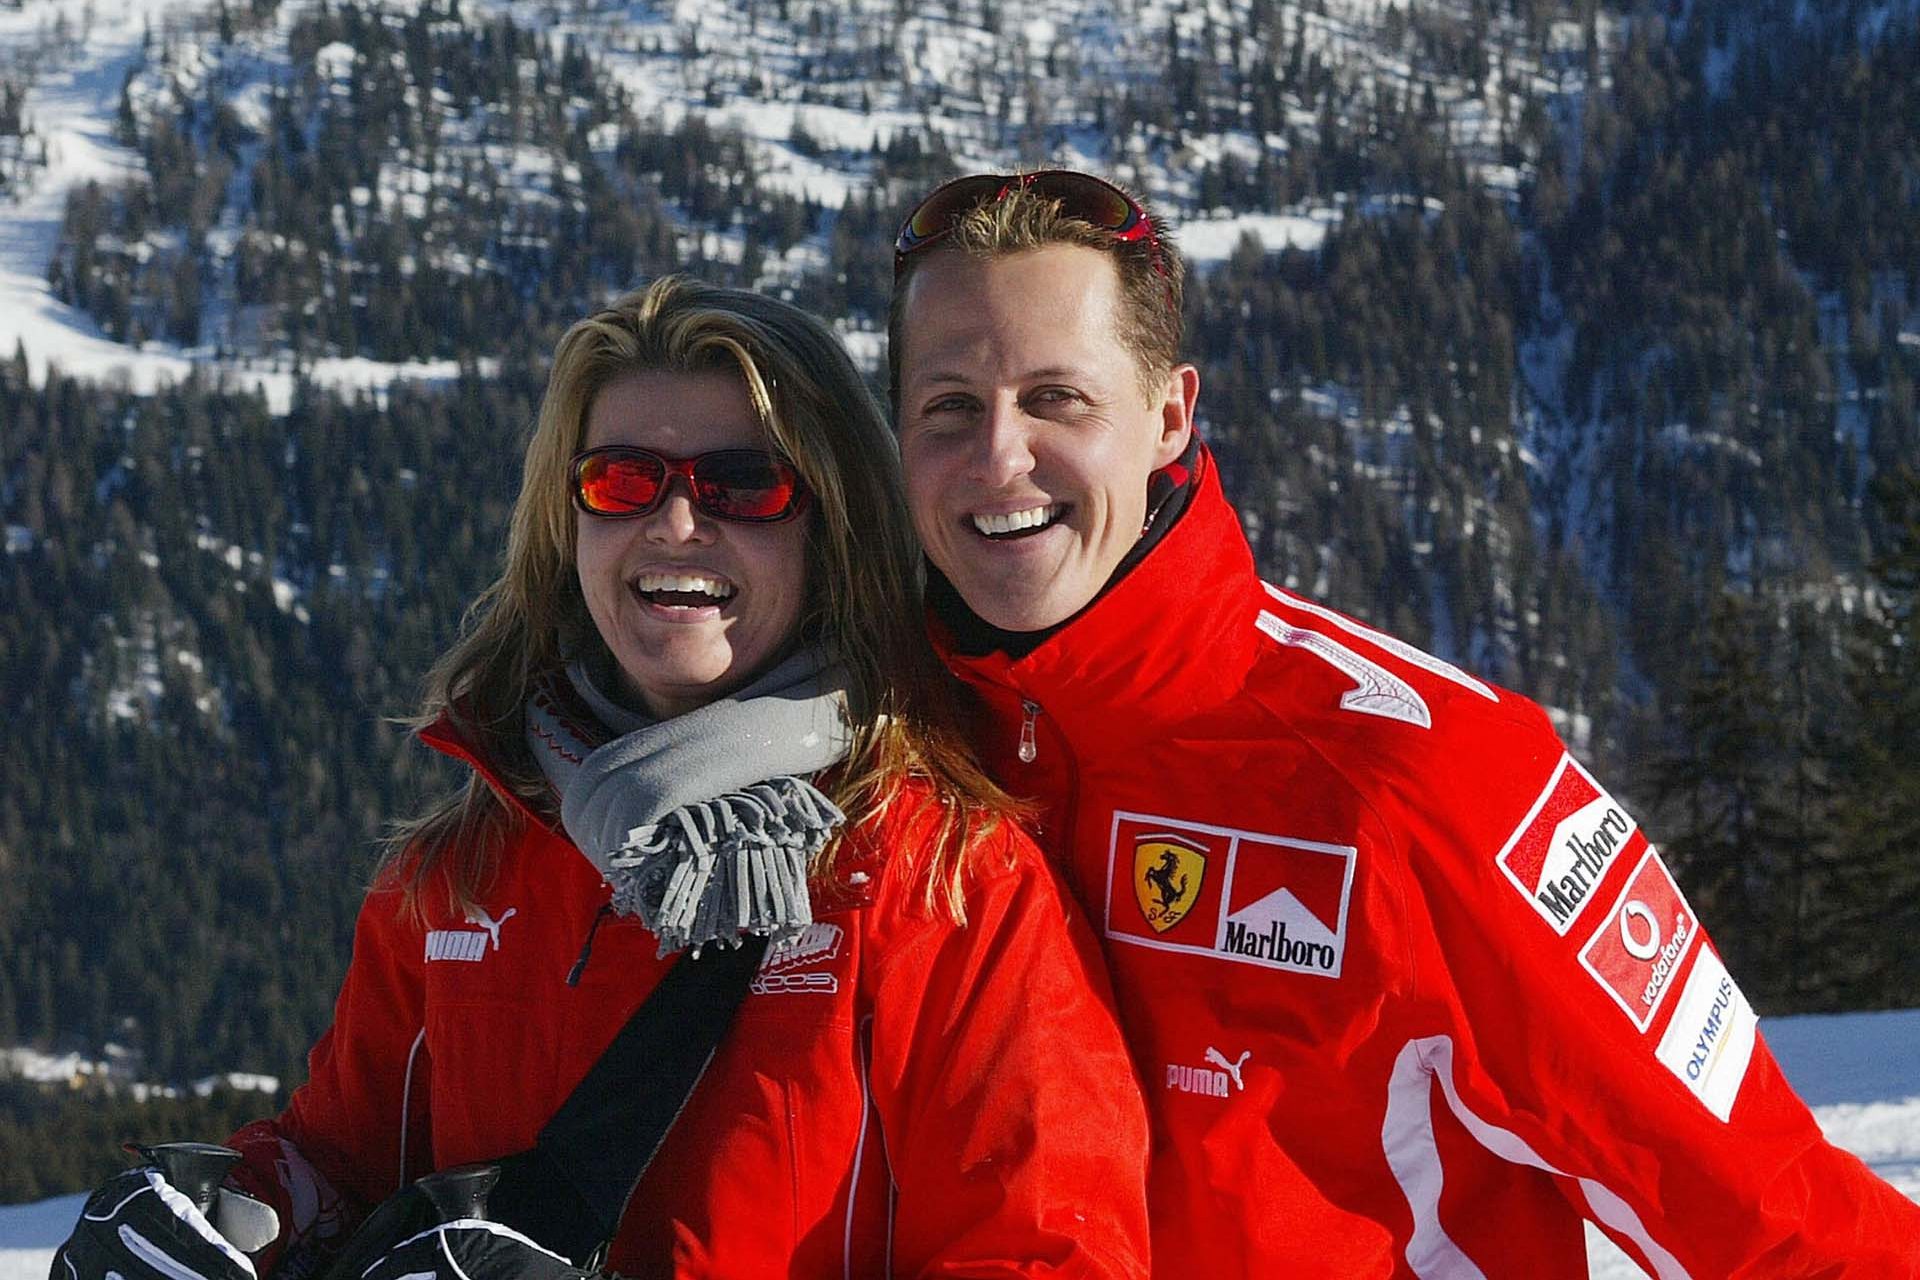 The incredible, ongoing battle to protect Michael Schumacher's privacy, including 